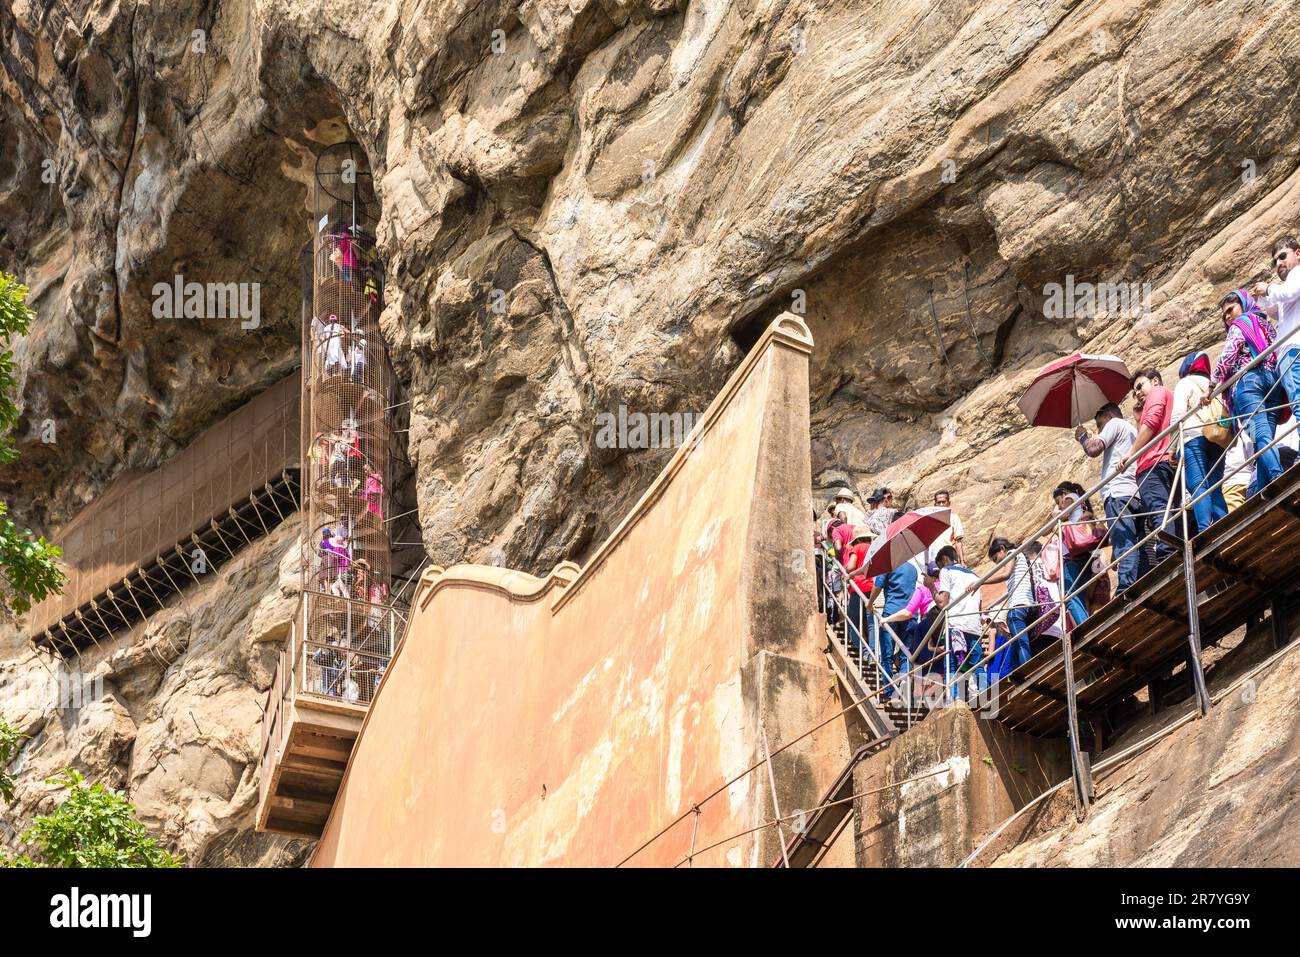 People climb up stairs and spiral stairs that leads to the cave with the famous frescoes Stock Photo